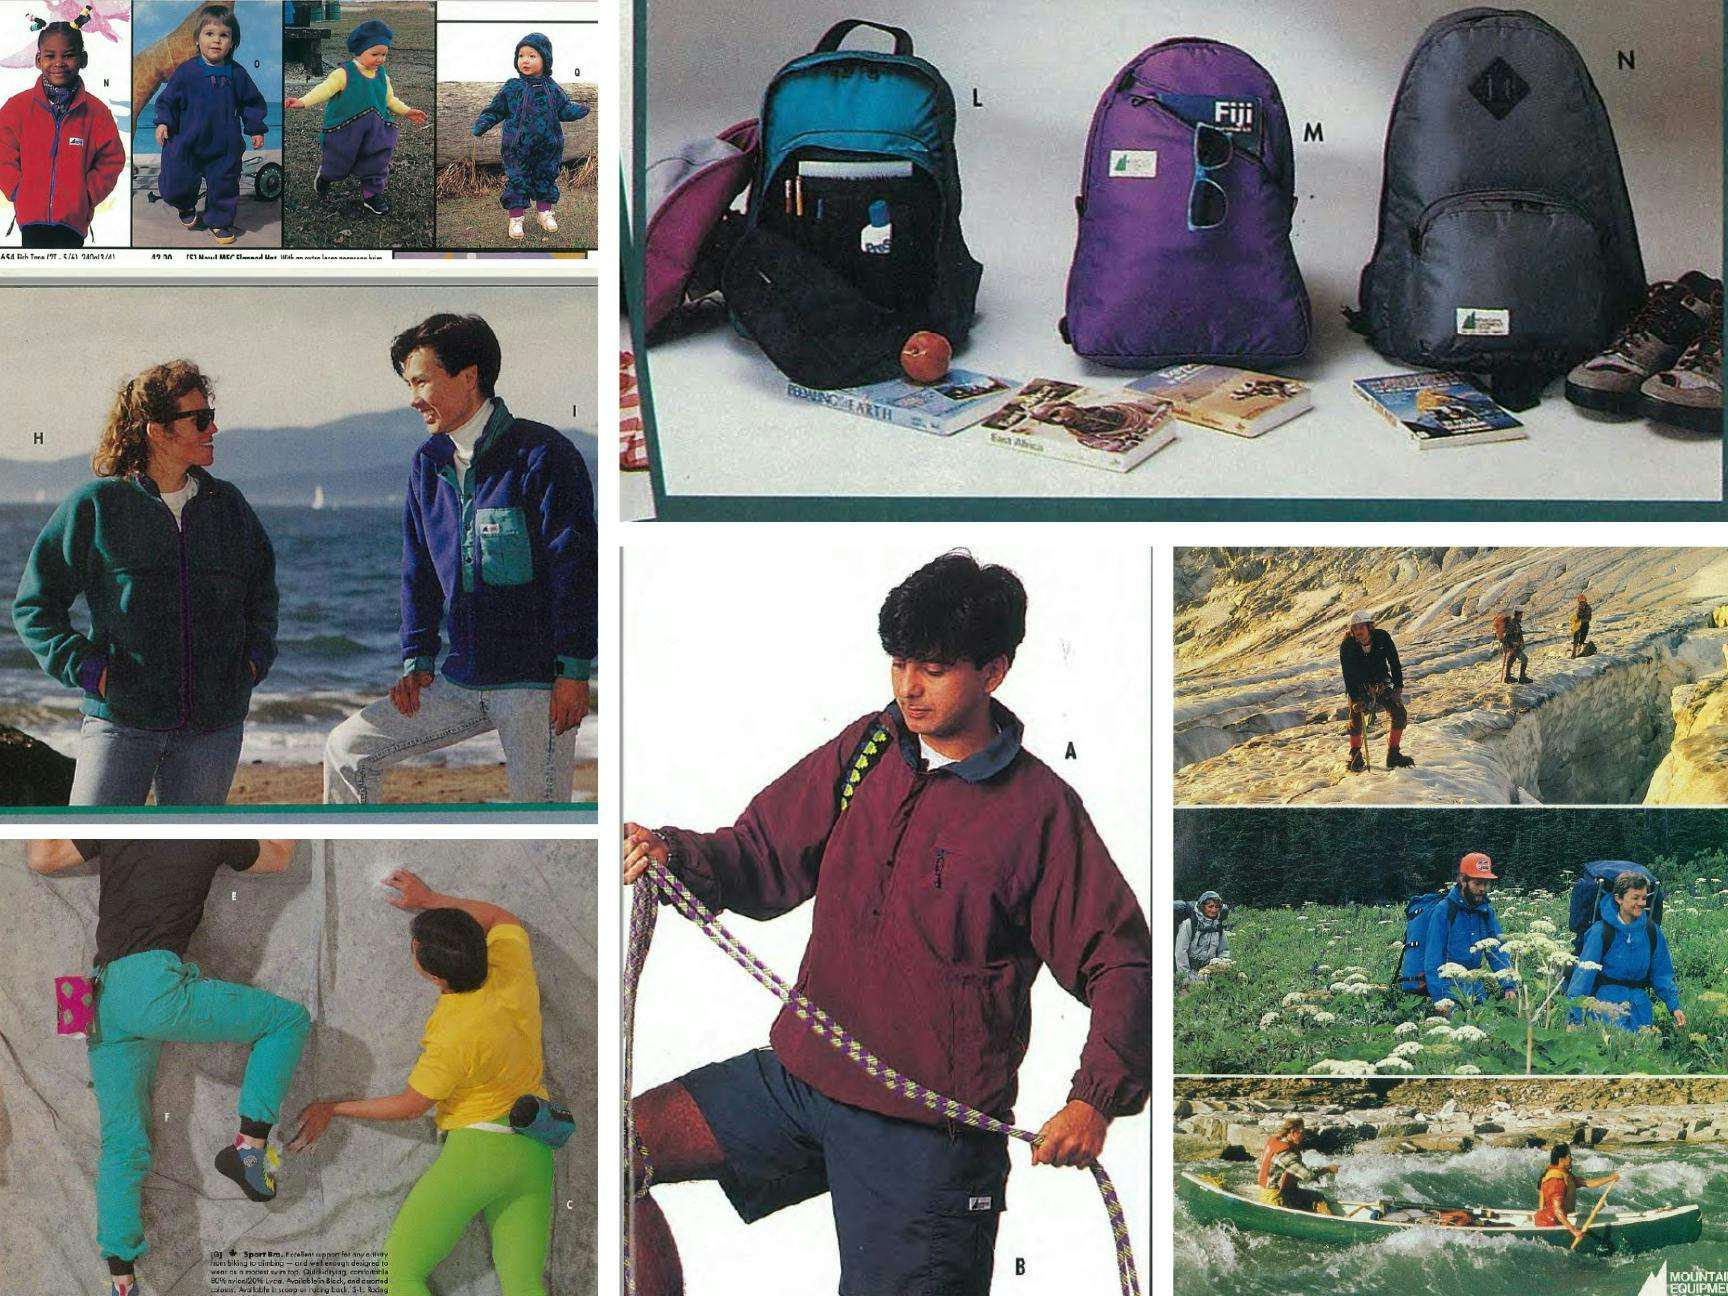 A collage of old MEC catalogue photos, showing images in studio and out in nature